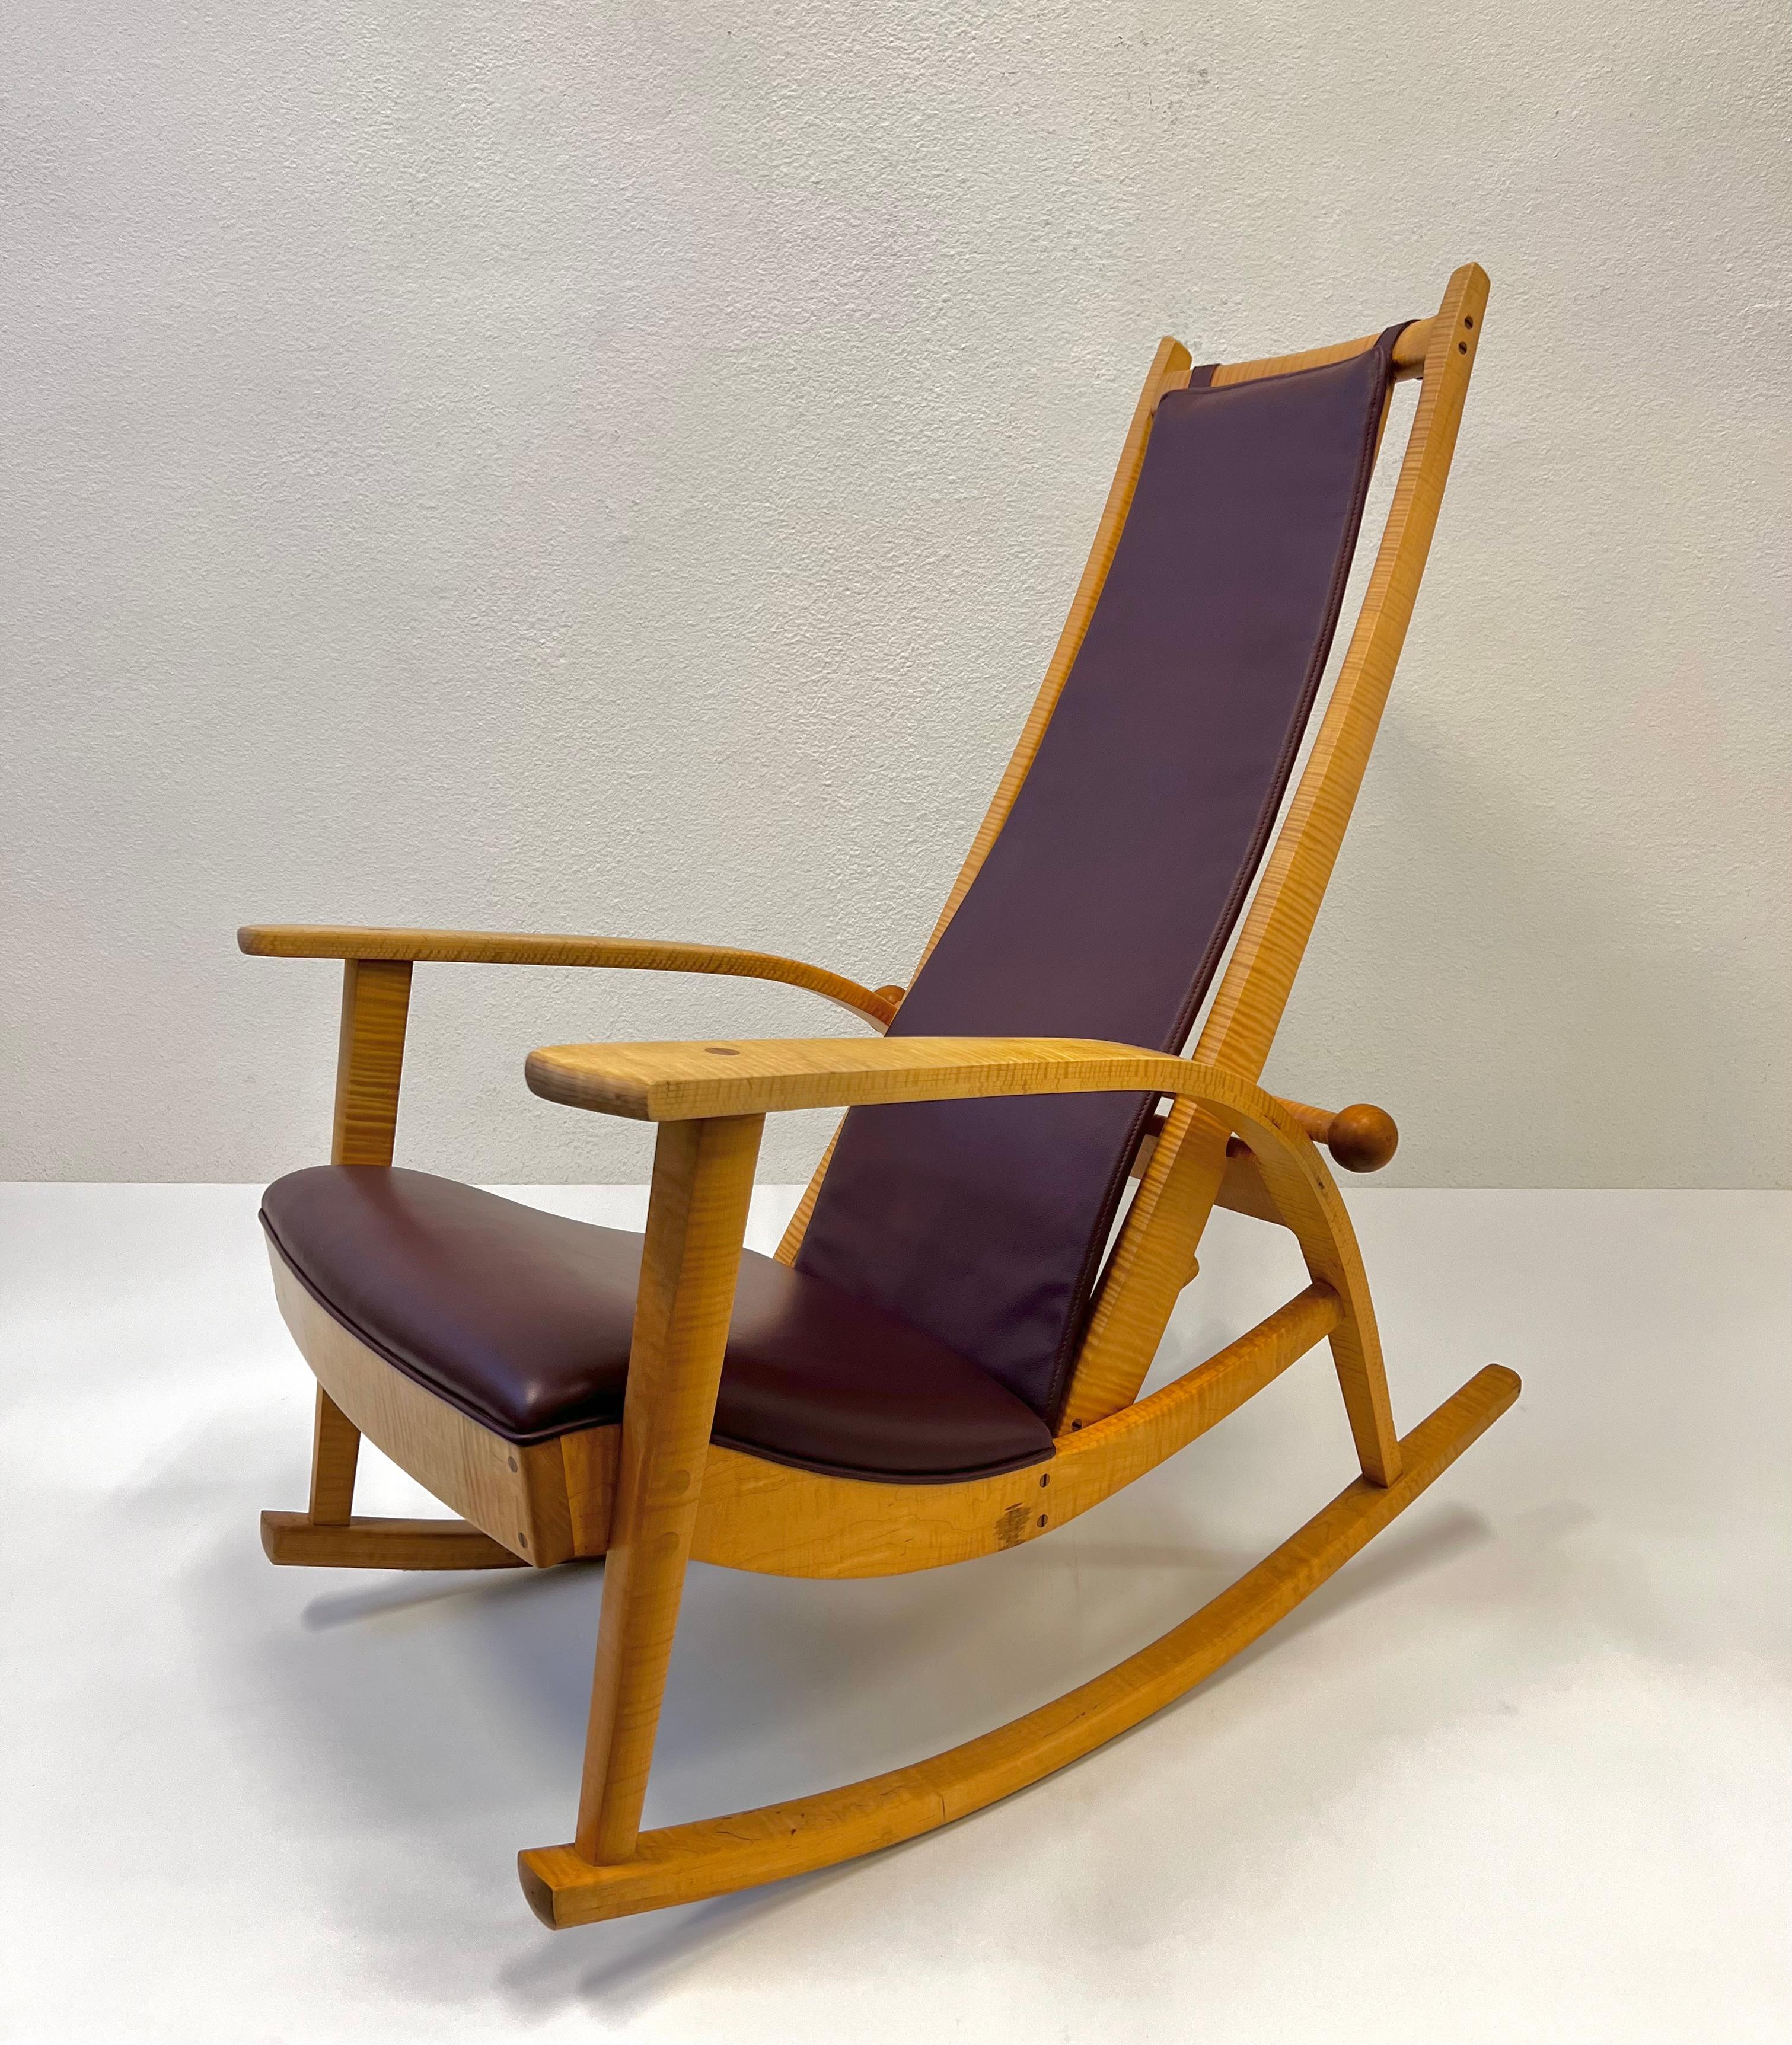 American Studio Hand Crafted Rocking Chair by Robert Erickson 